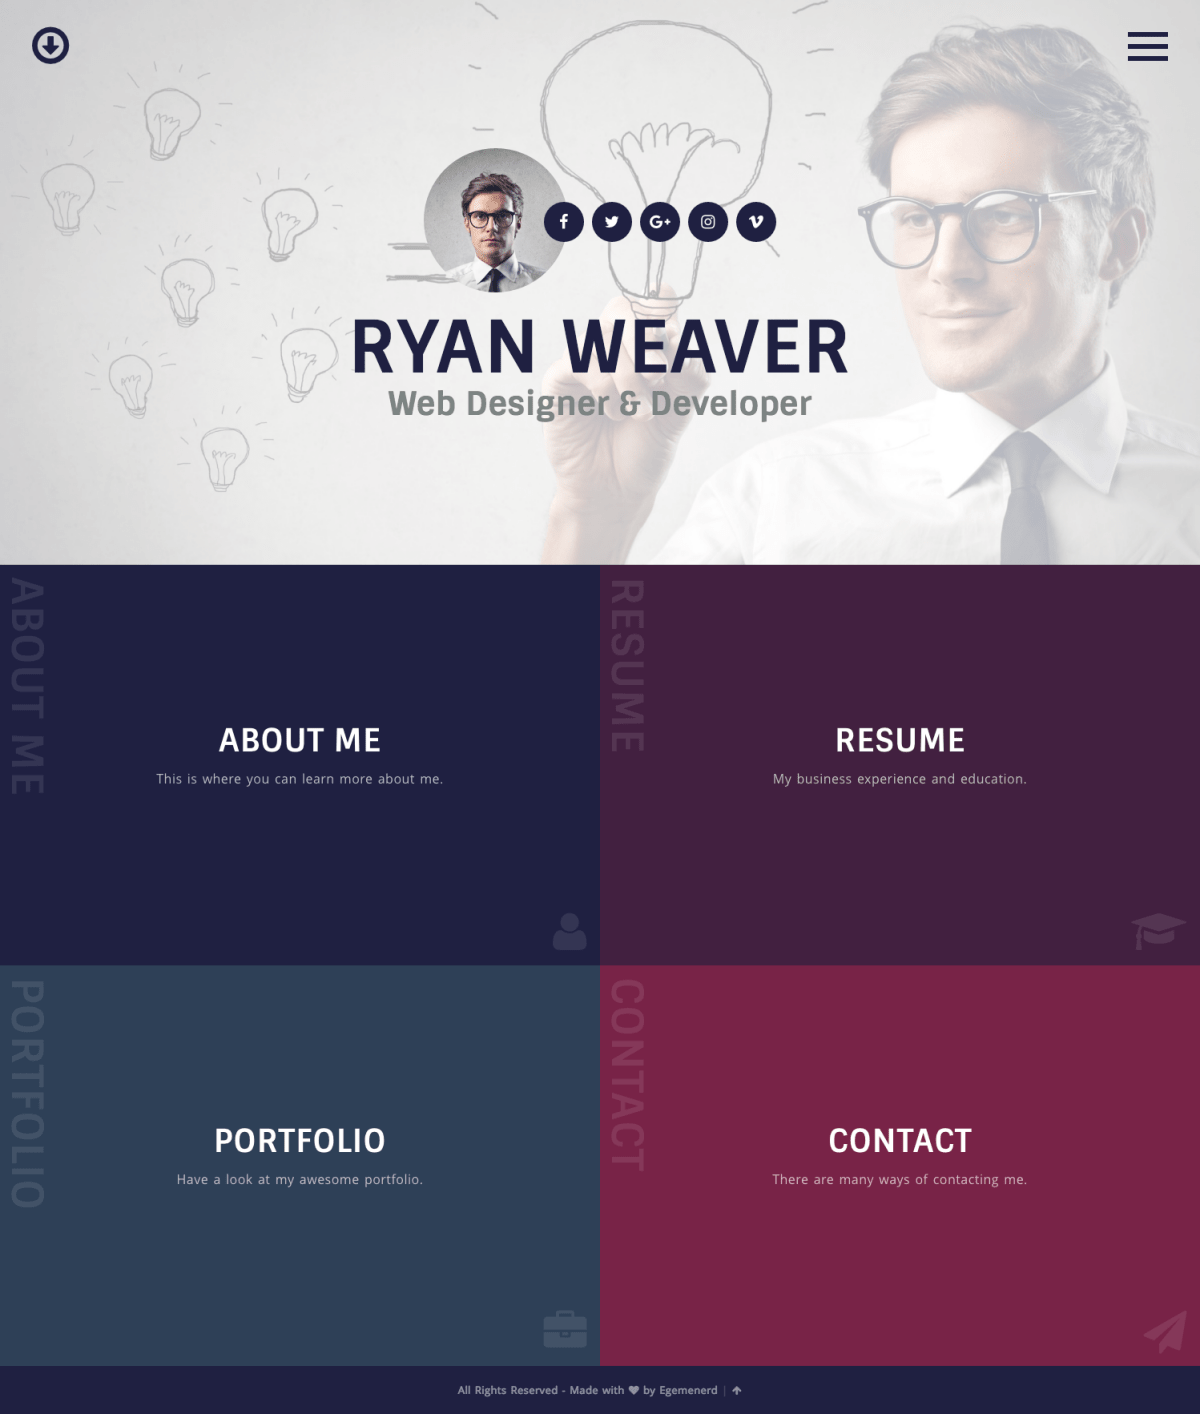 Insurgent - Personal Vcard Resume HTML Template